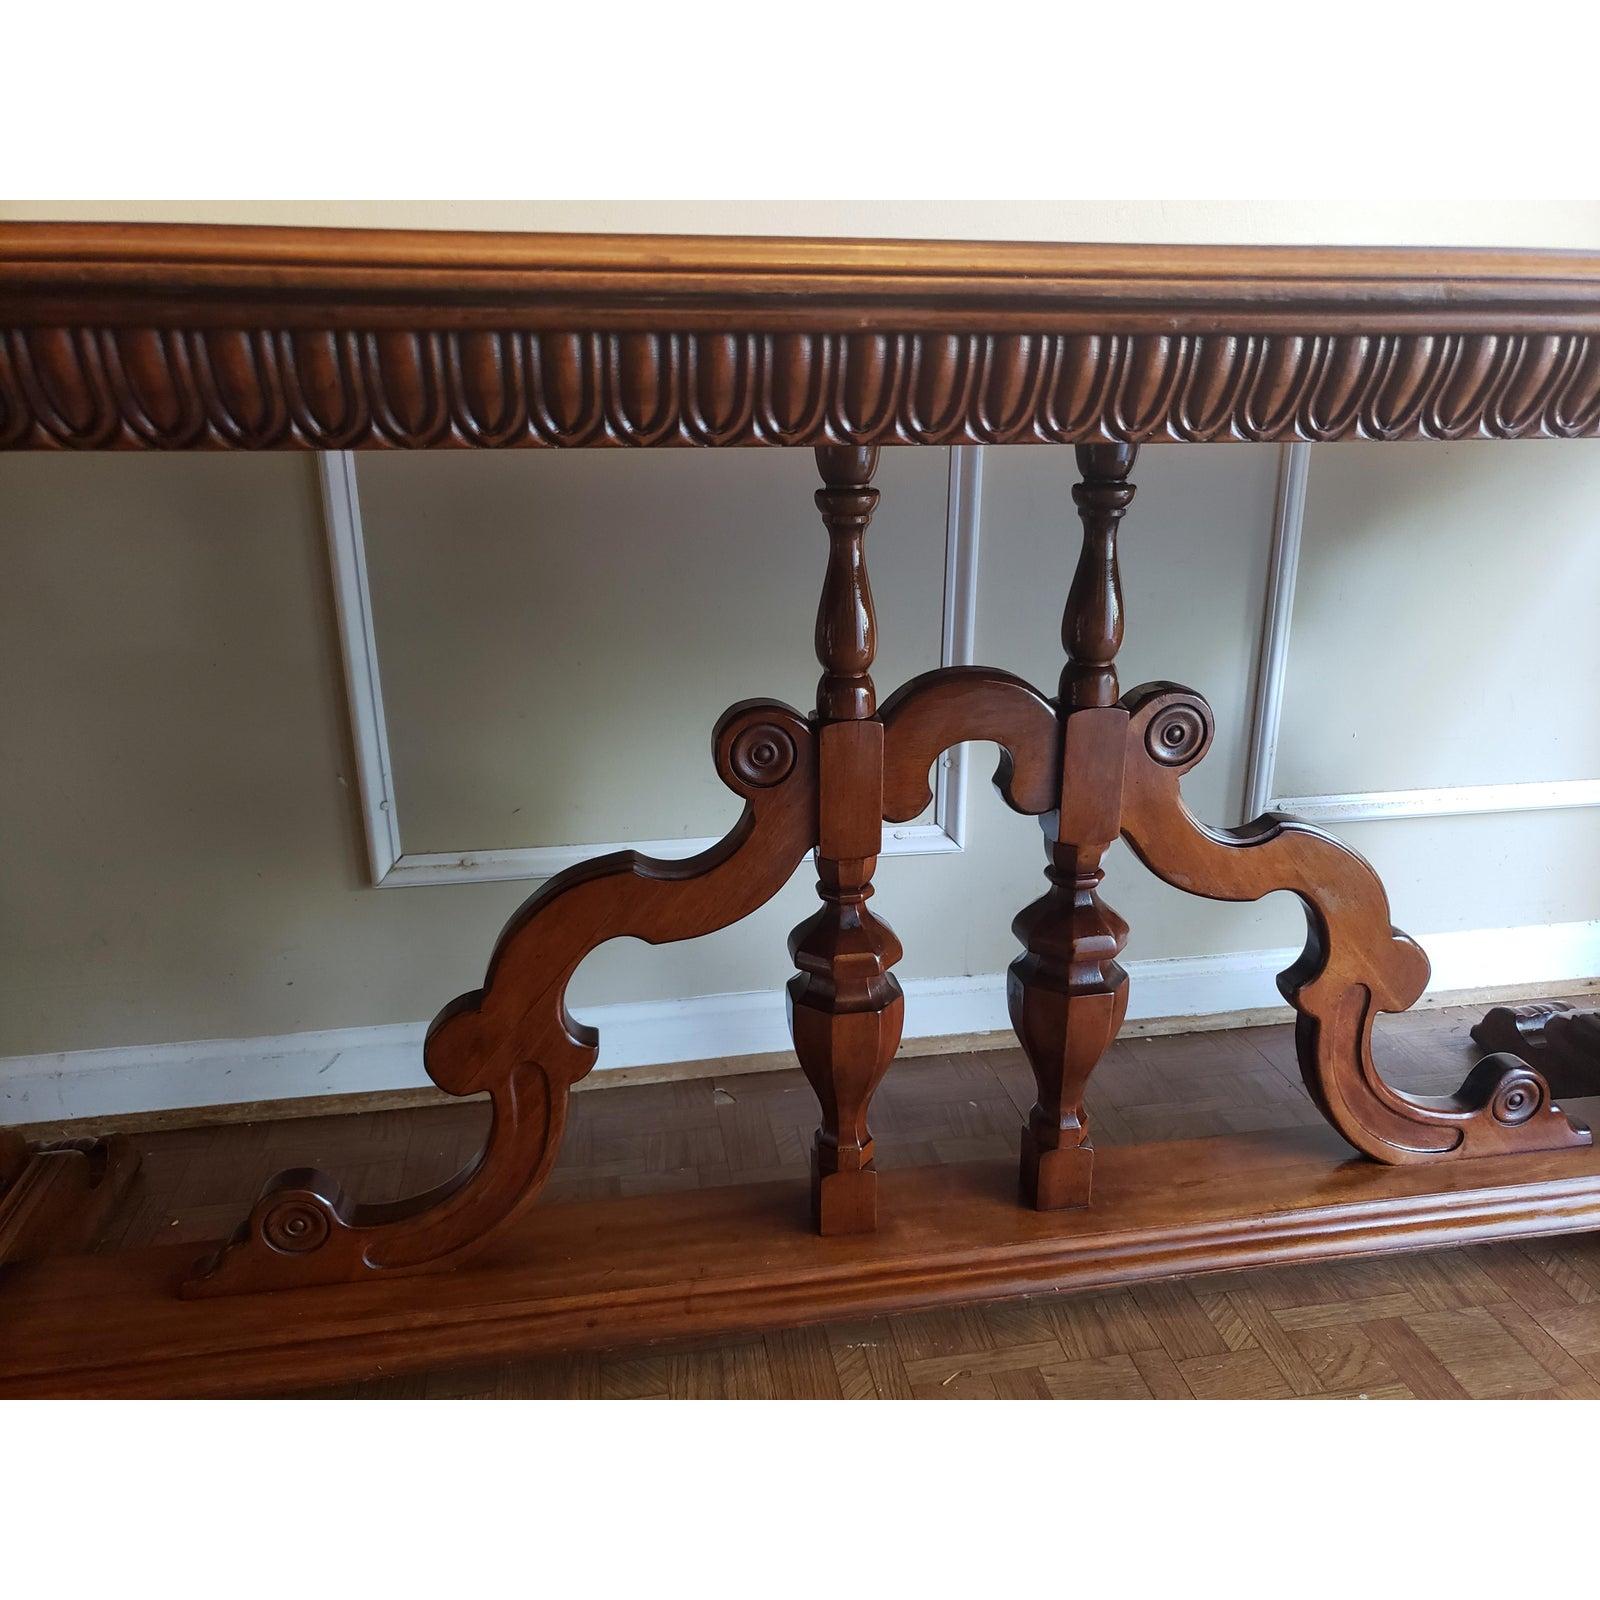 1910s Imperial Grand Rapids Carved Solid Walnut Trestle Table In Good Condition For Sale In Germantown, MD